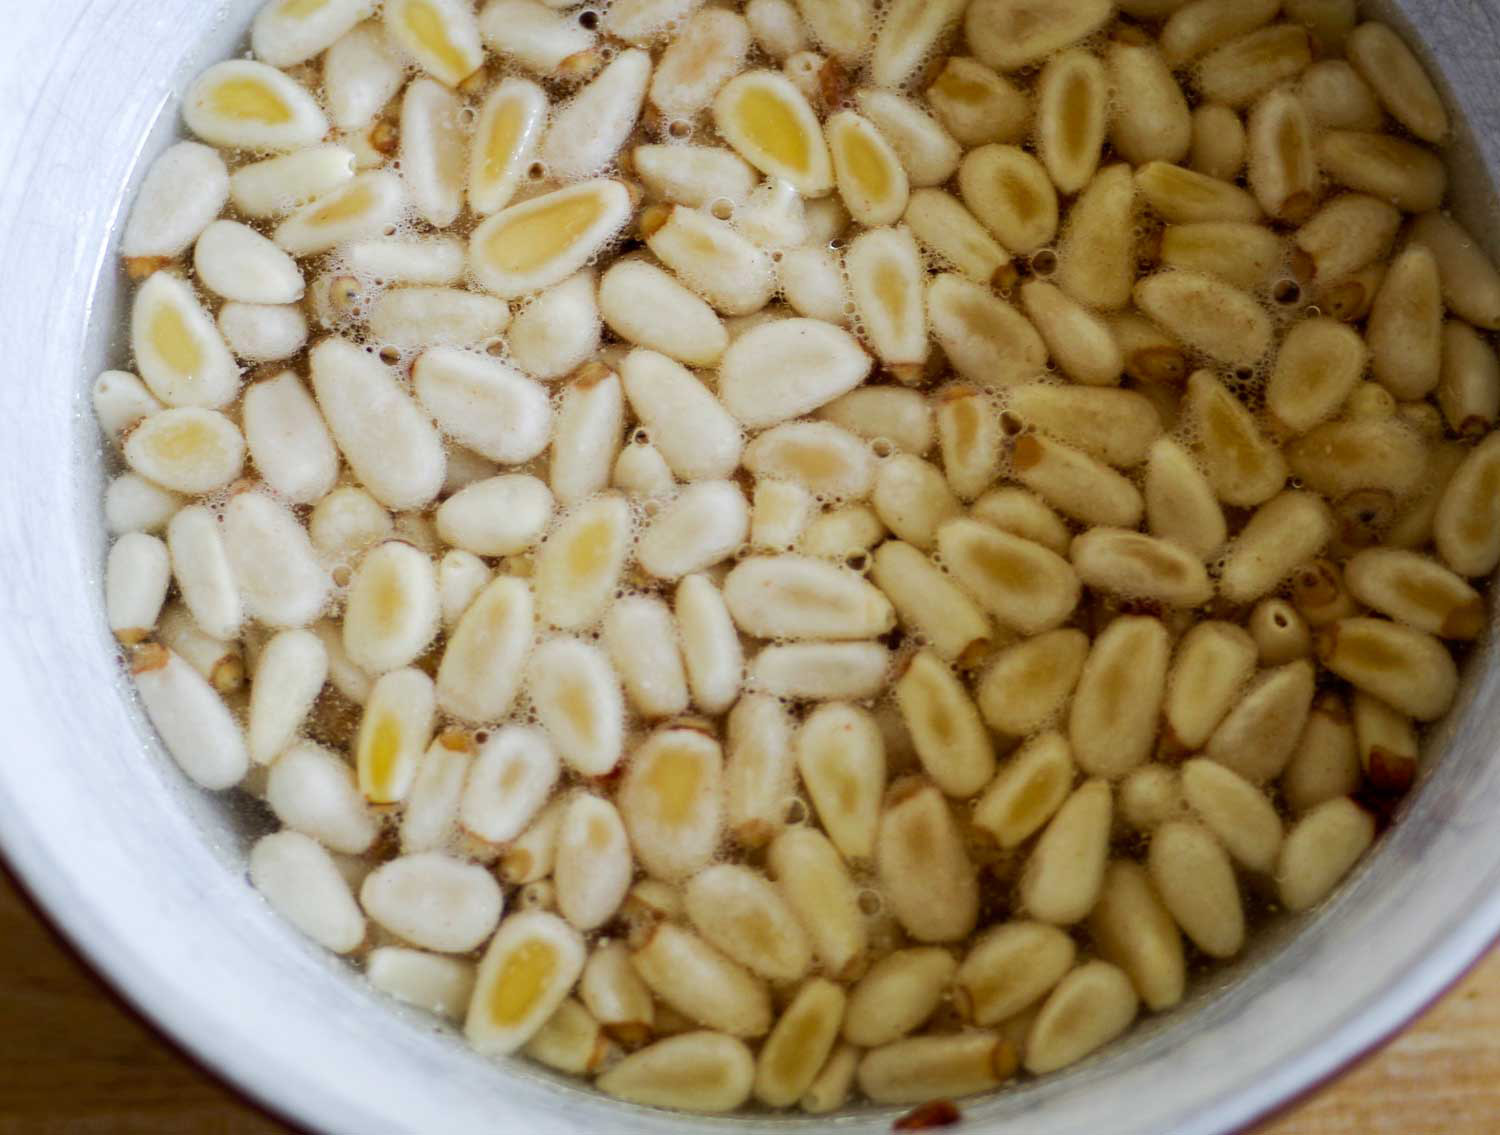 Soaked pine nuts.